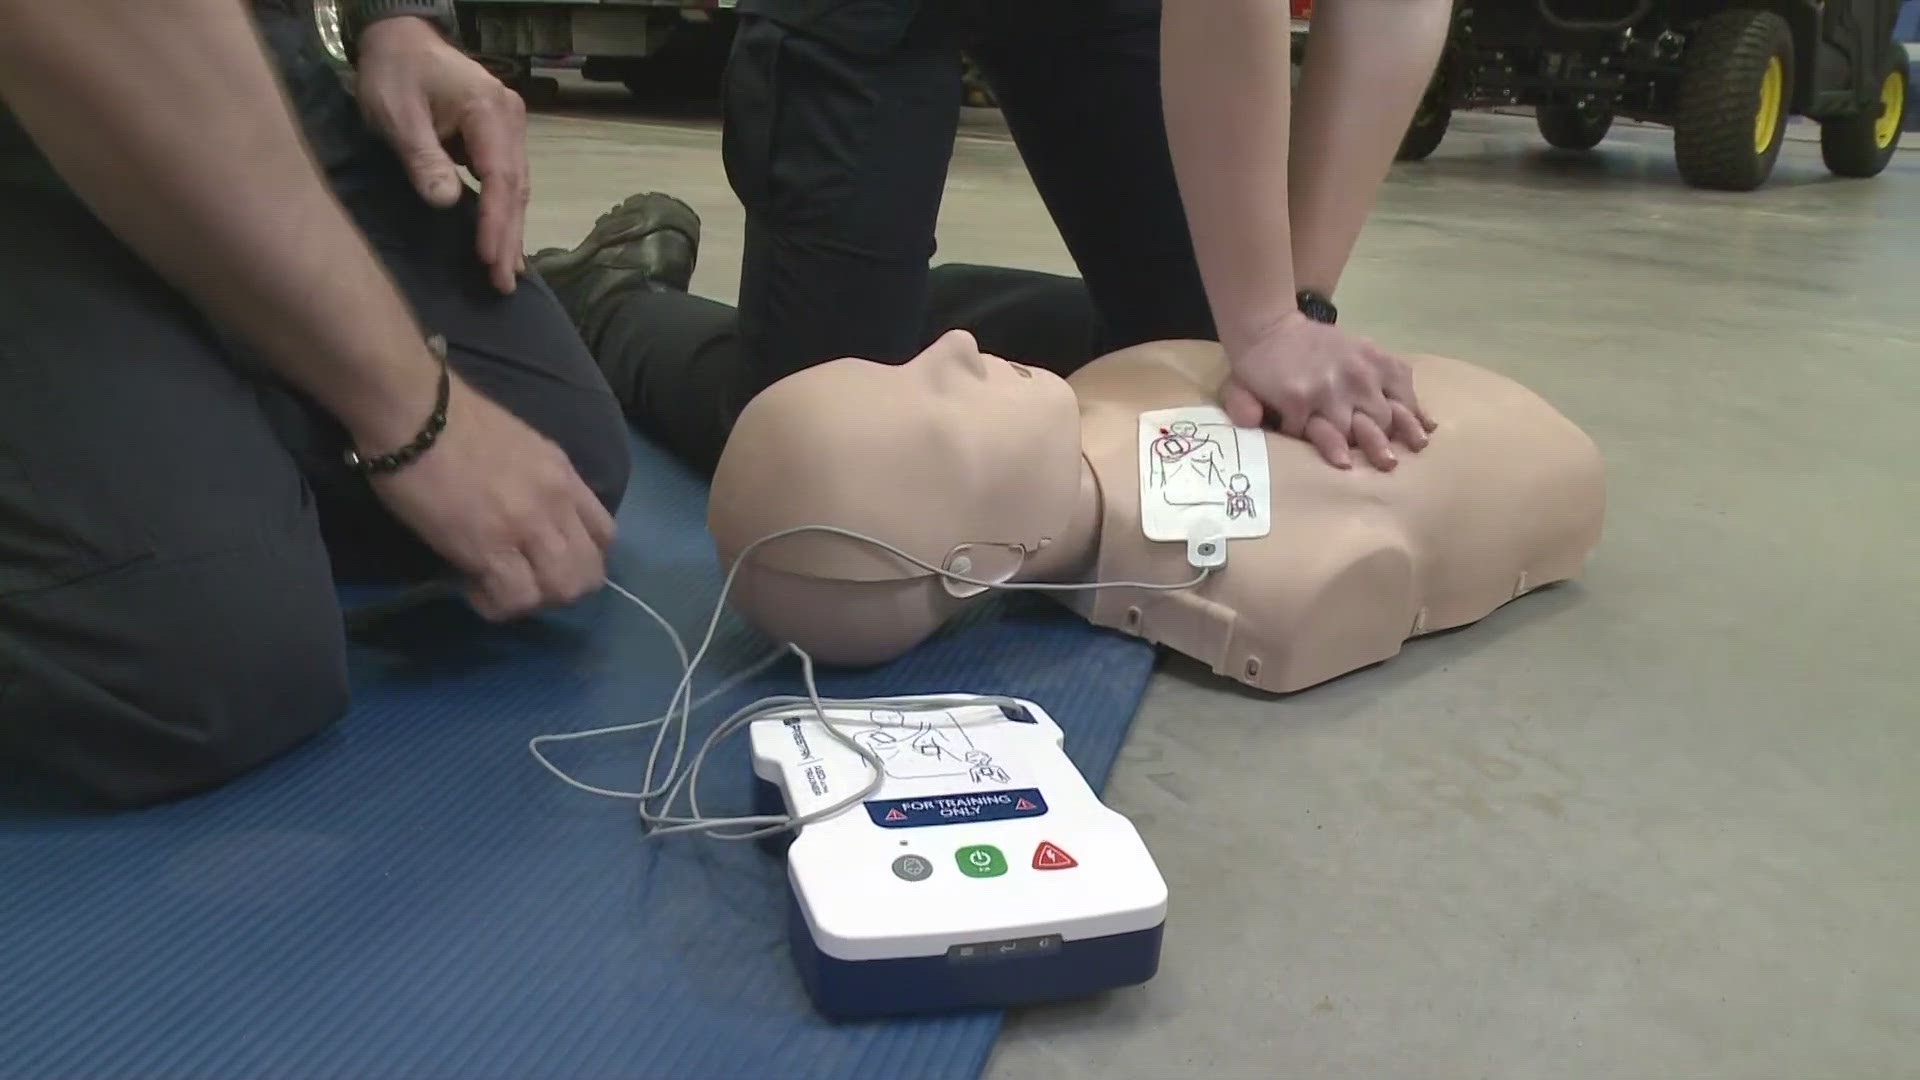 An AED, or an automated external defibrillator, is used to shock the heart of someone in cardiac arrest to correct the heart rhythm and restart the heart.